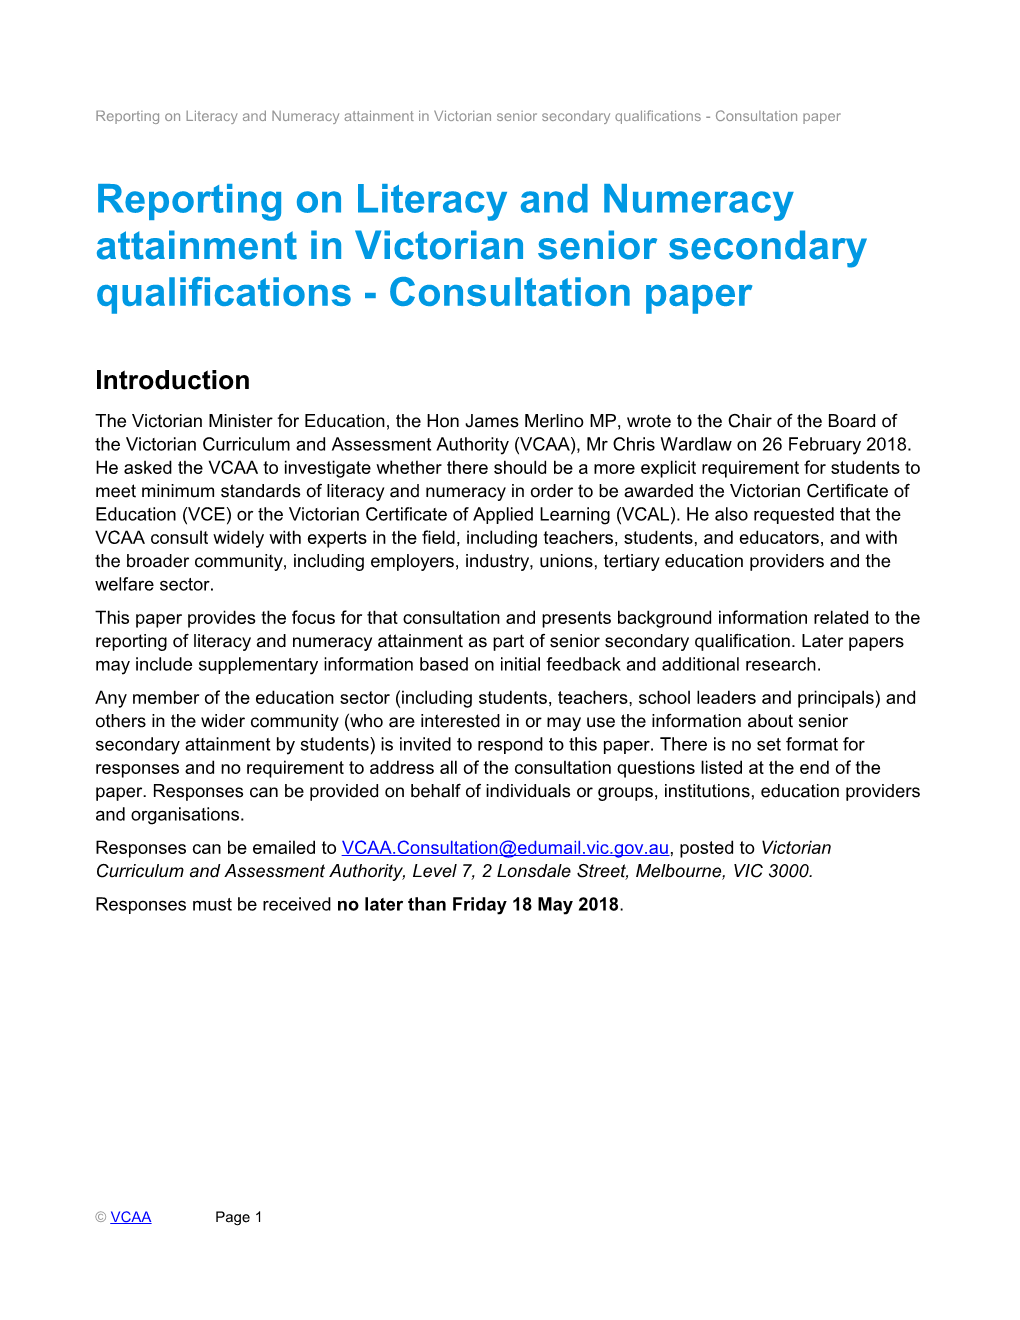 Reporting on Literacy and Numeracy Attainment in Victorian Senior Secondary Qualifications